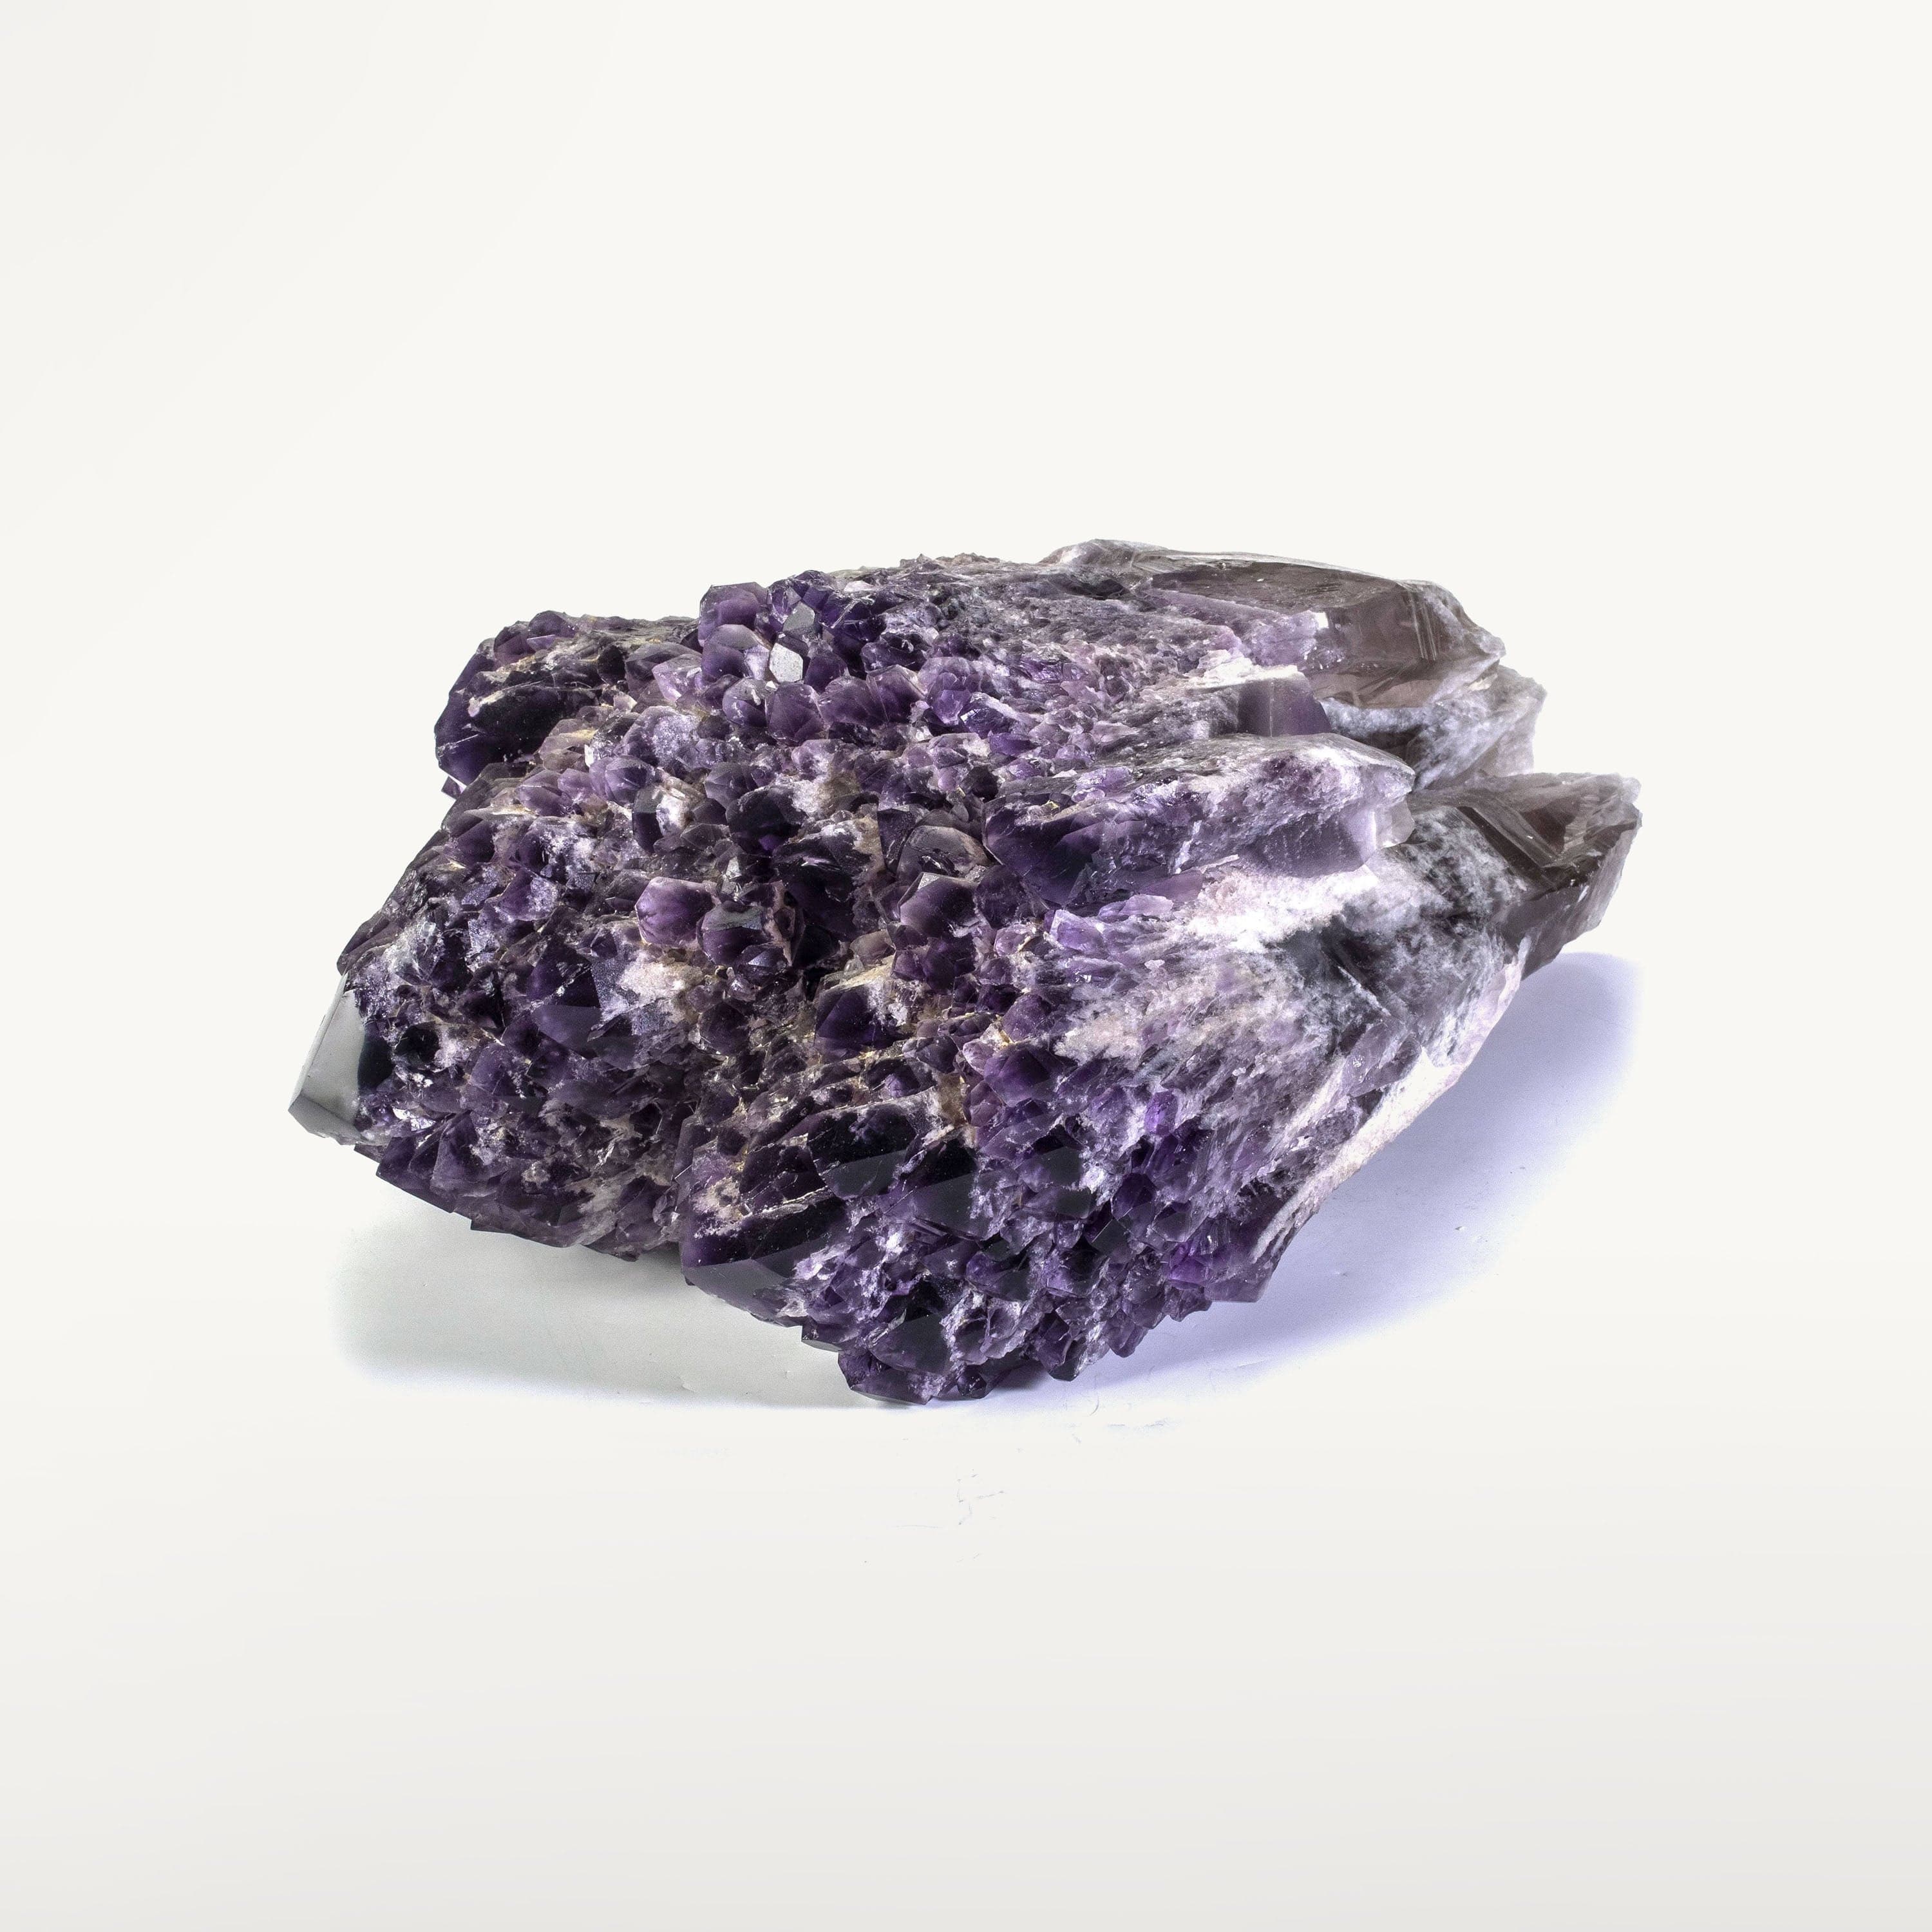 Kalifano Amethyst Rare Natural Elestial Amethyst Cluster Point from Brazil - 33.7 lbs ALW5800.001